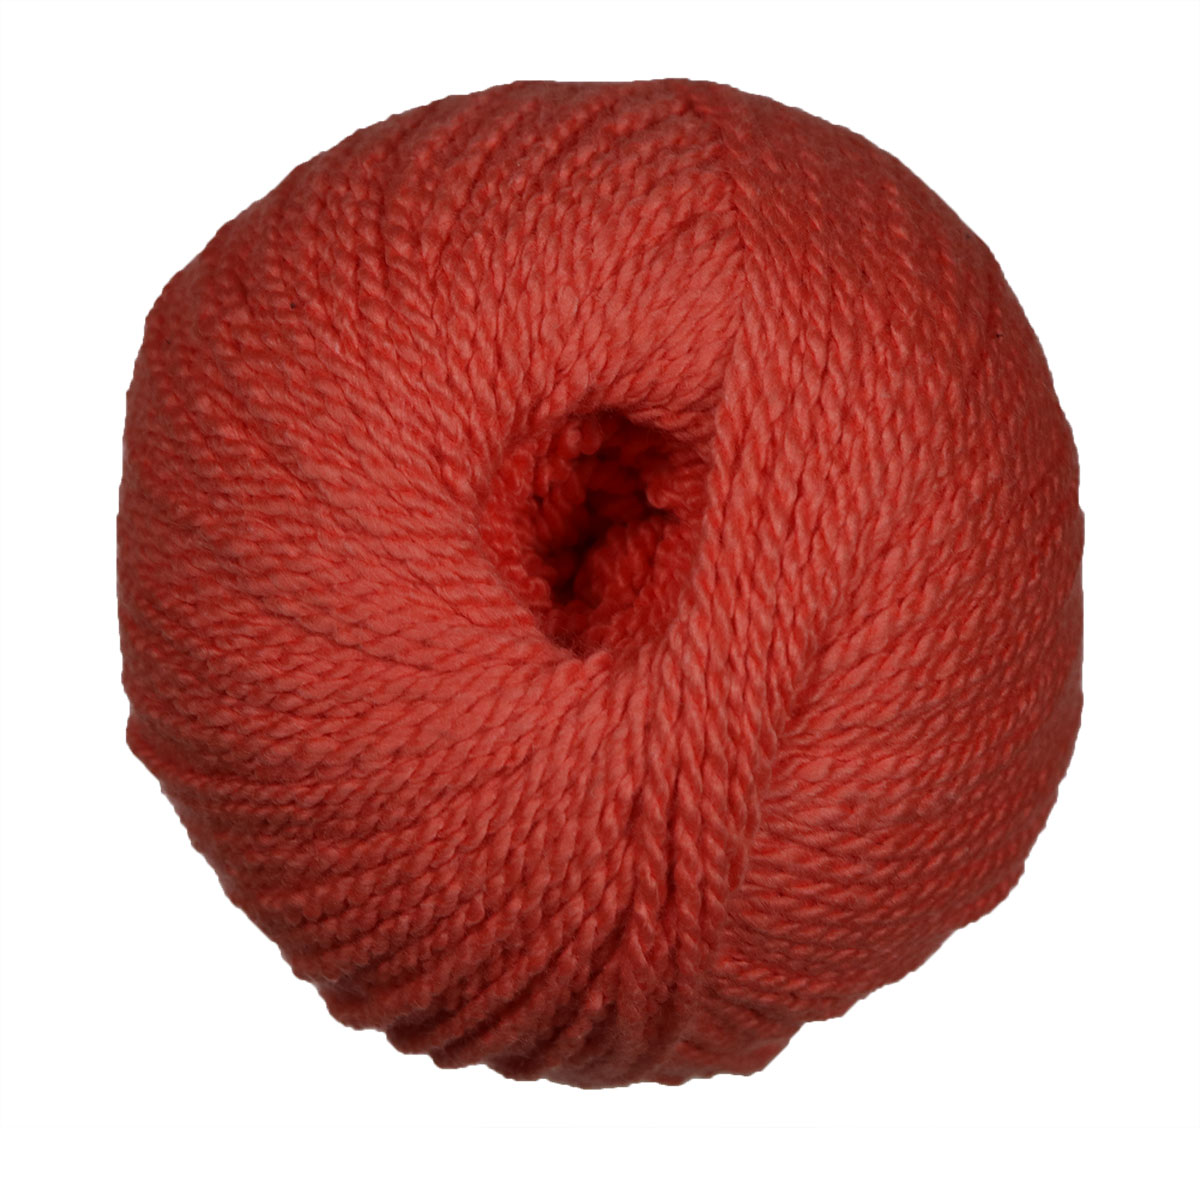 Cascade Fixation Yarn - 4100 Flame at Jimmy Beans Wool